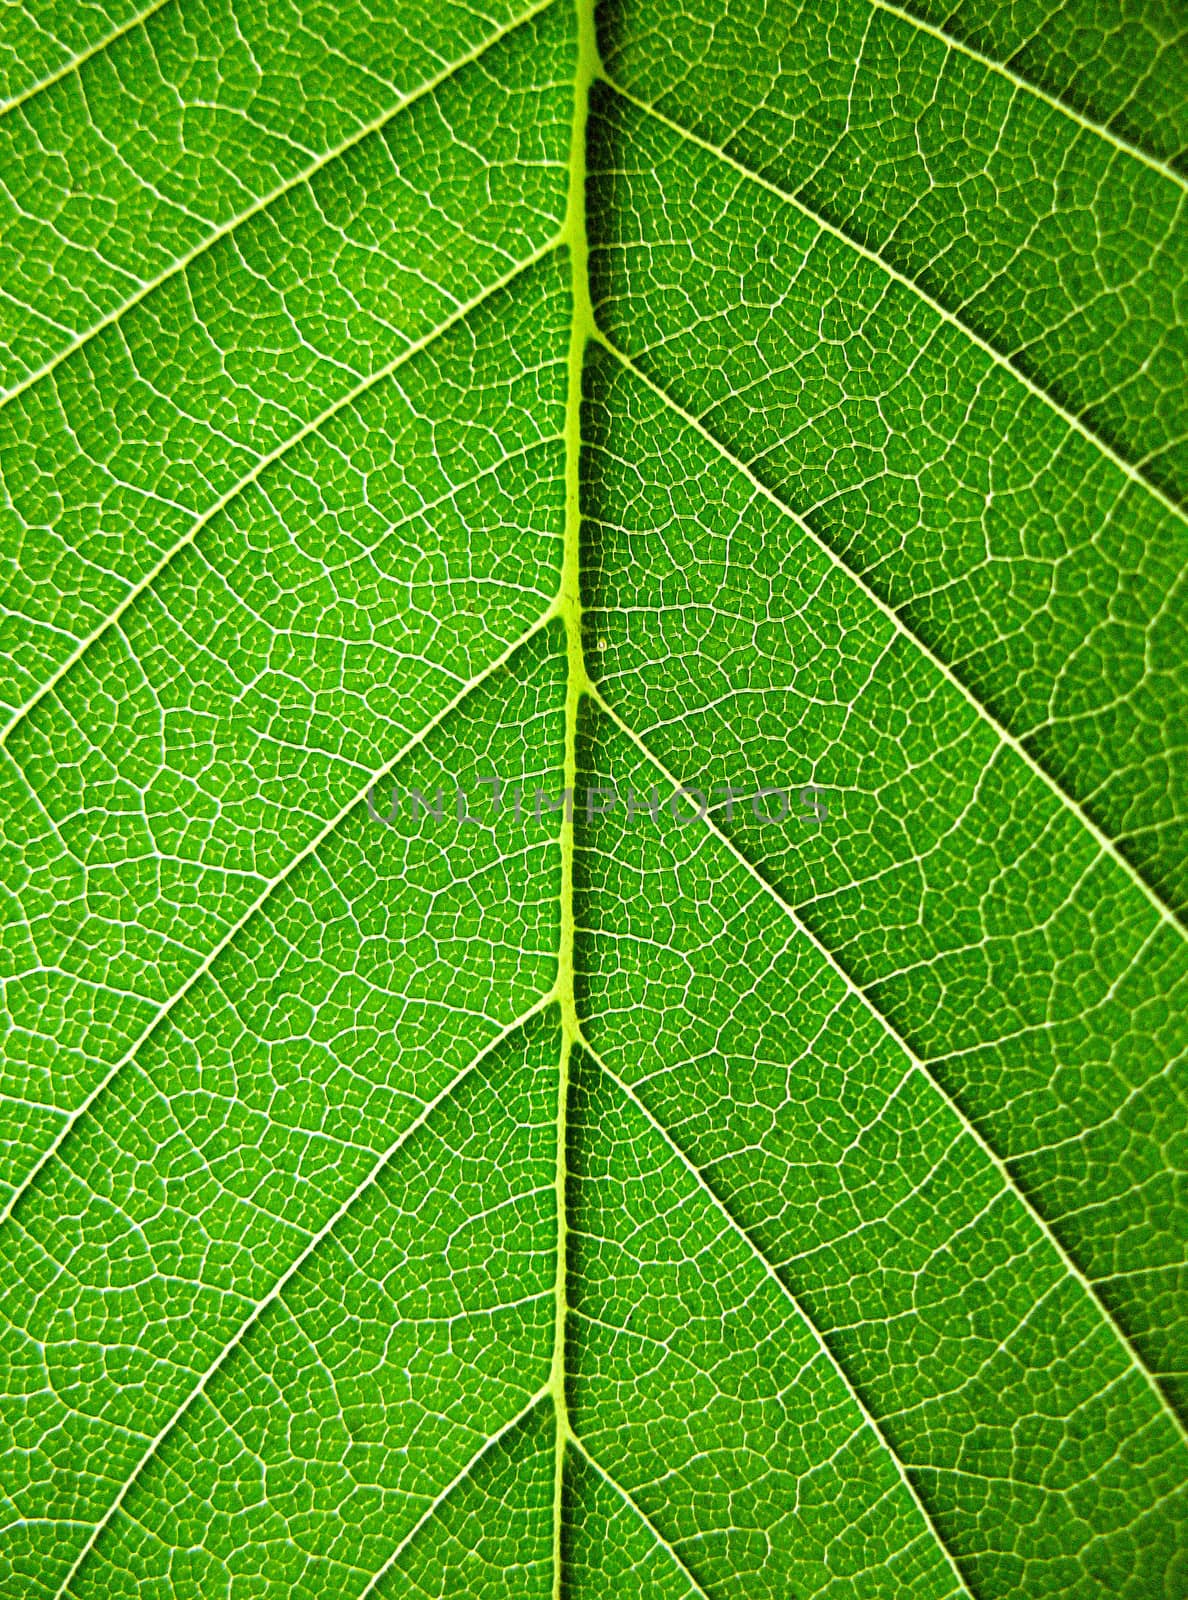 Leaves, close-up by shutswis